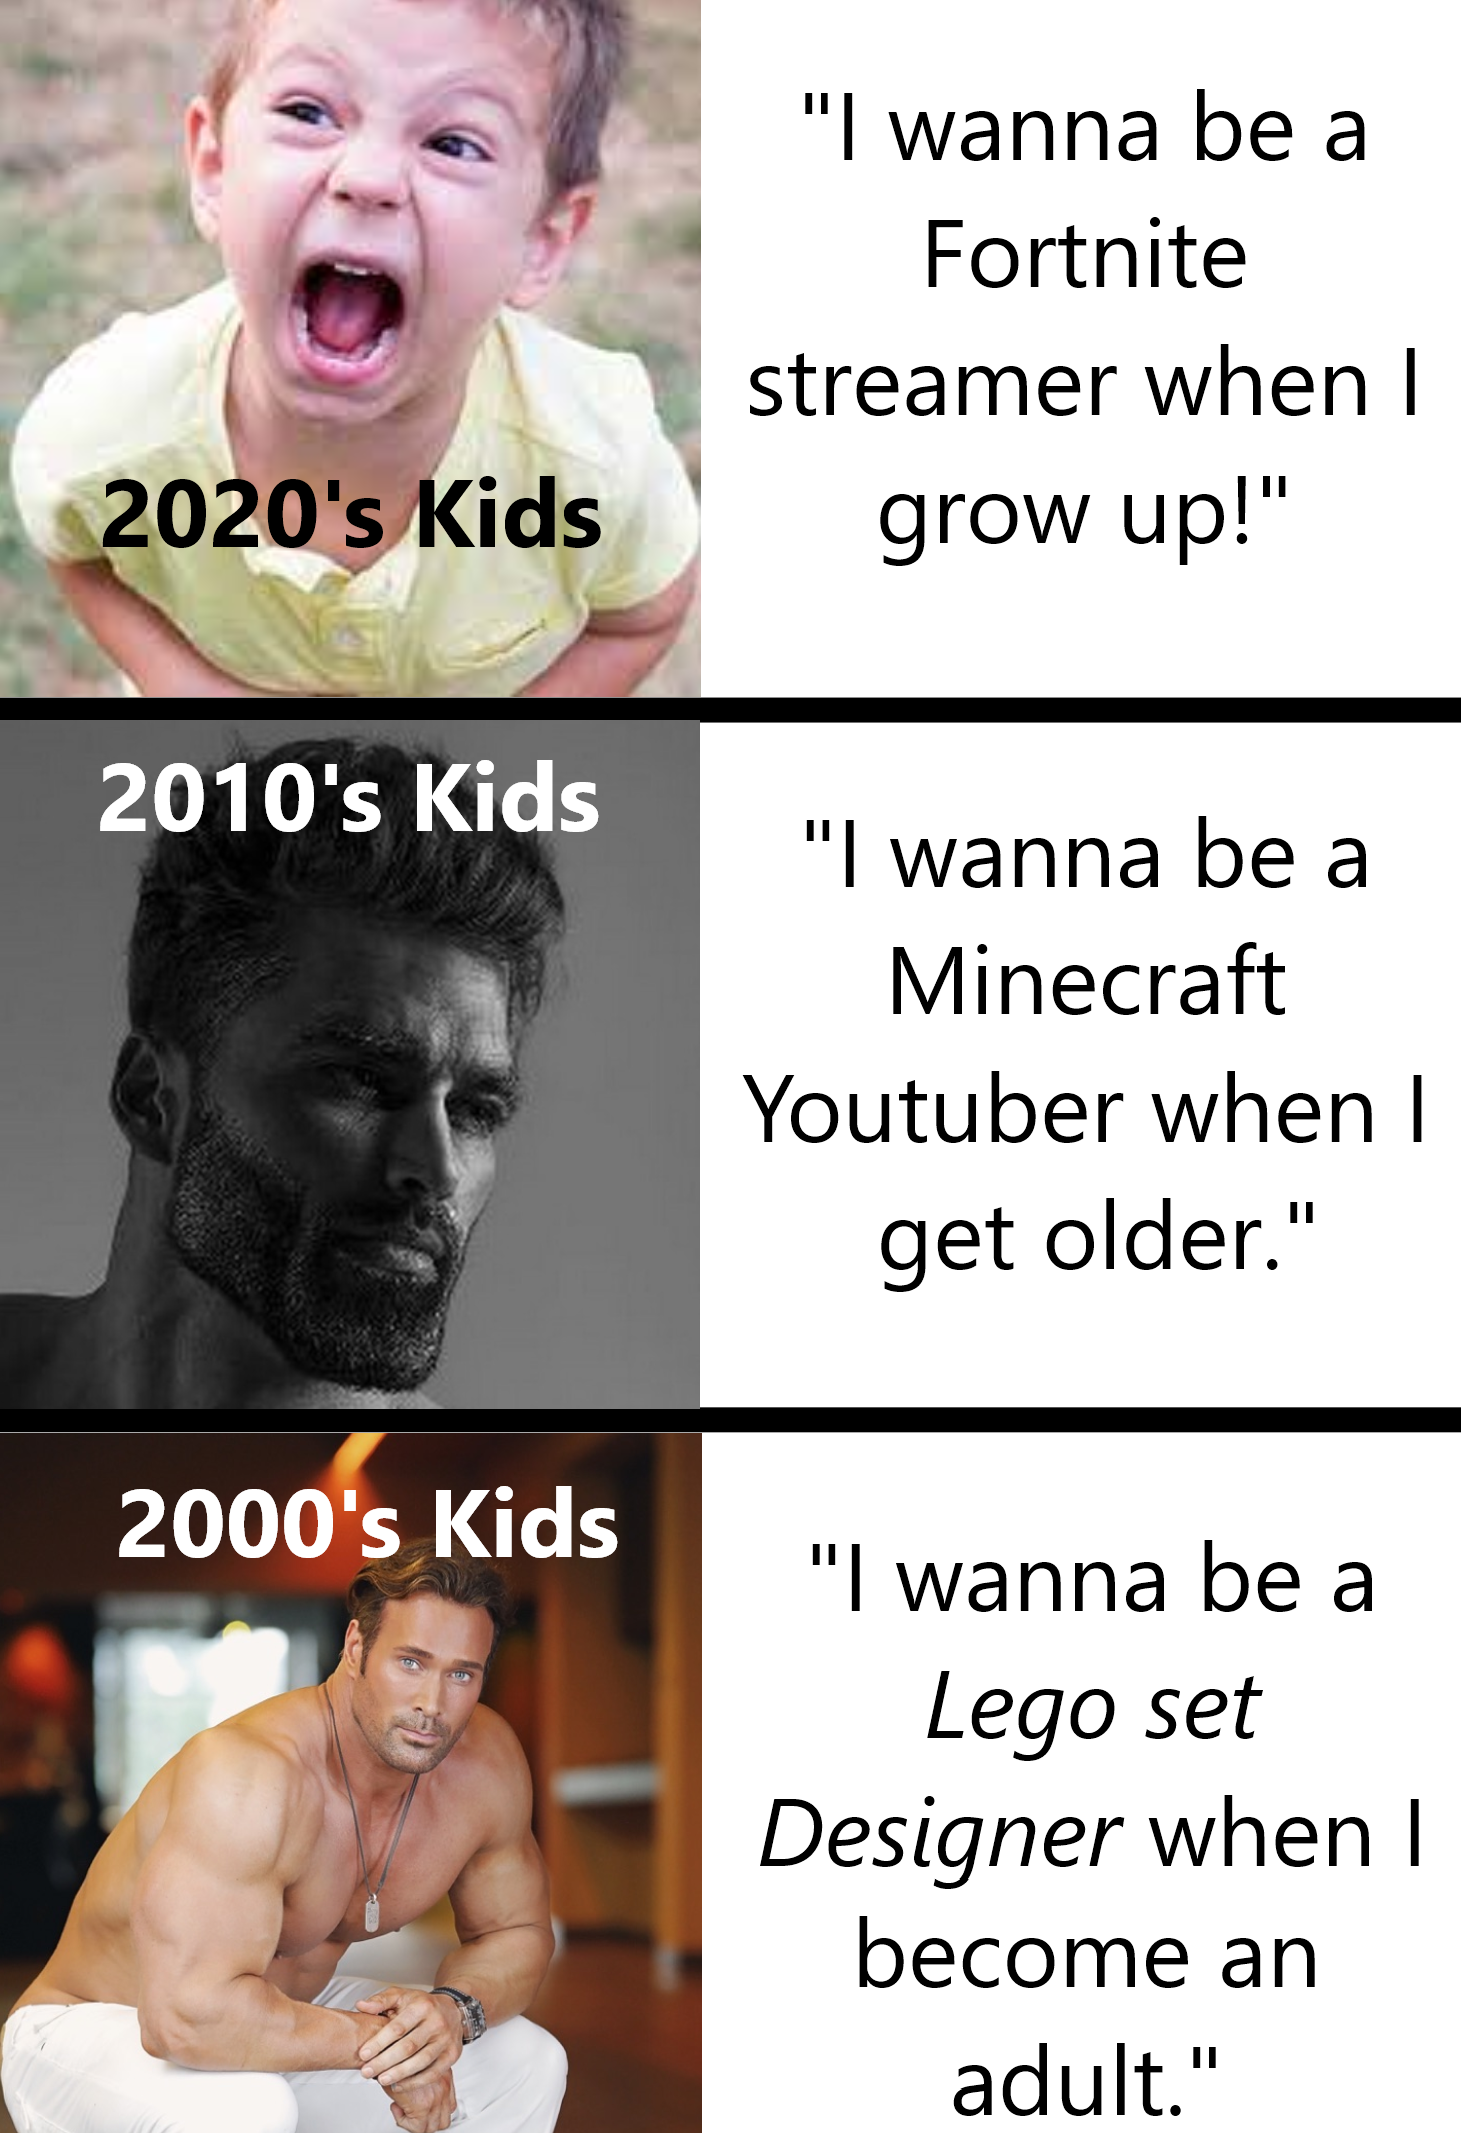 funny memes - kids - 2020's Kids 2010's Kids 2000's Kids "I wanna be a Fortnite streamer when I grow up!" "I wanna be a Minecraft Youtuber when I get older." "I wanna be a Lego set Designer when I become an adult."